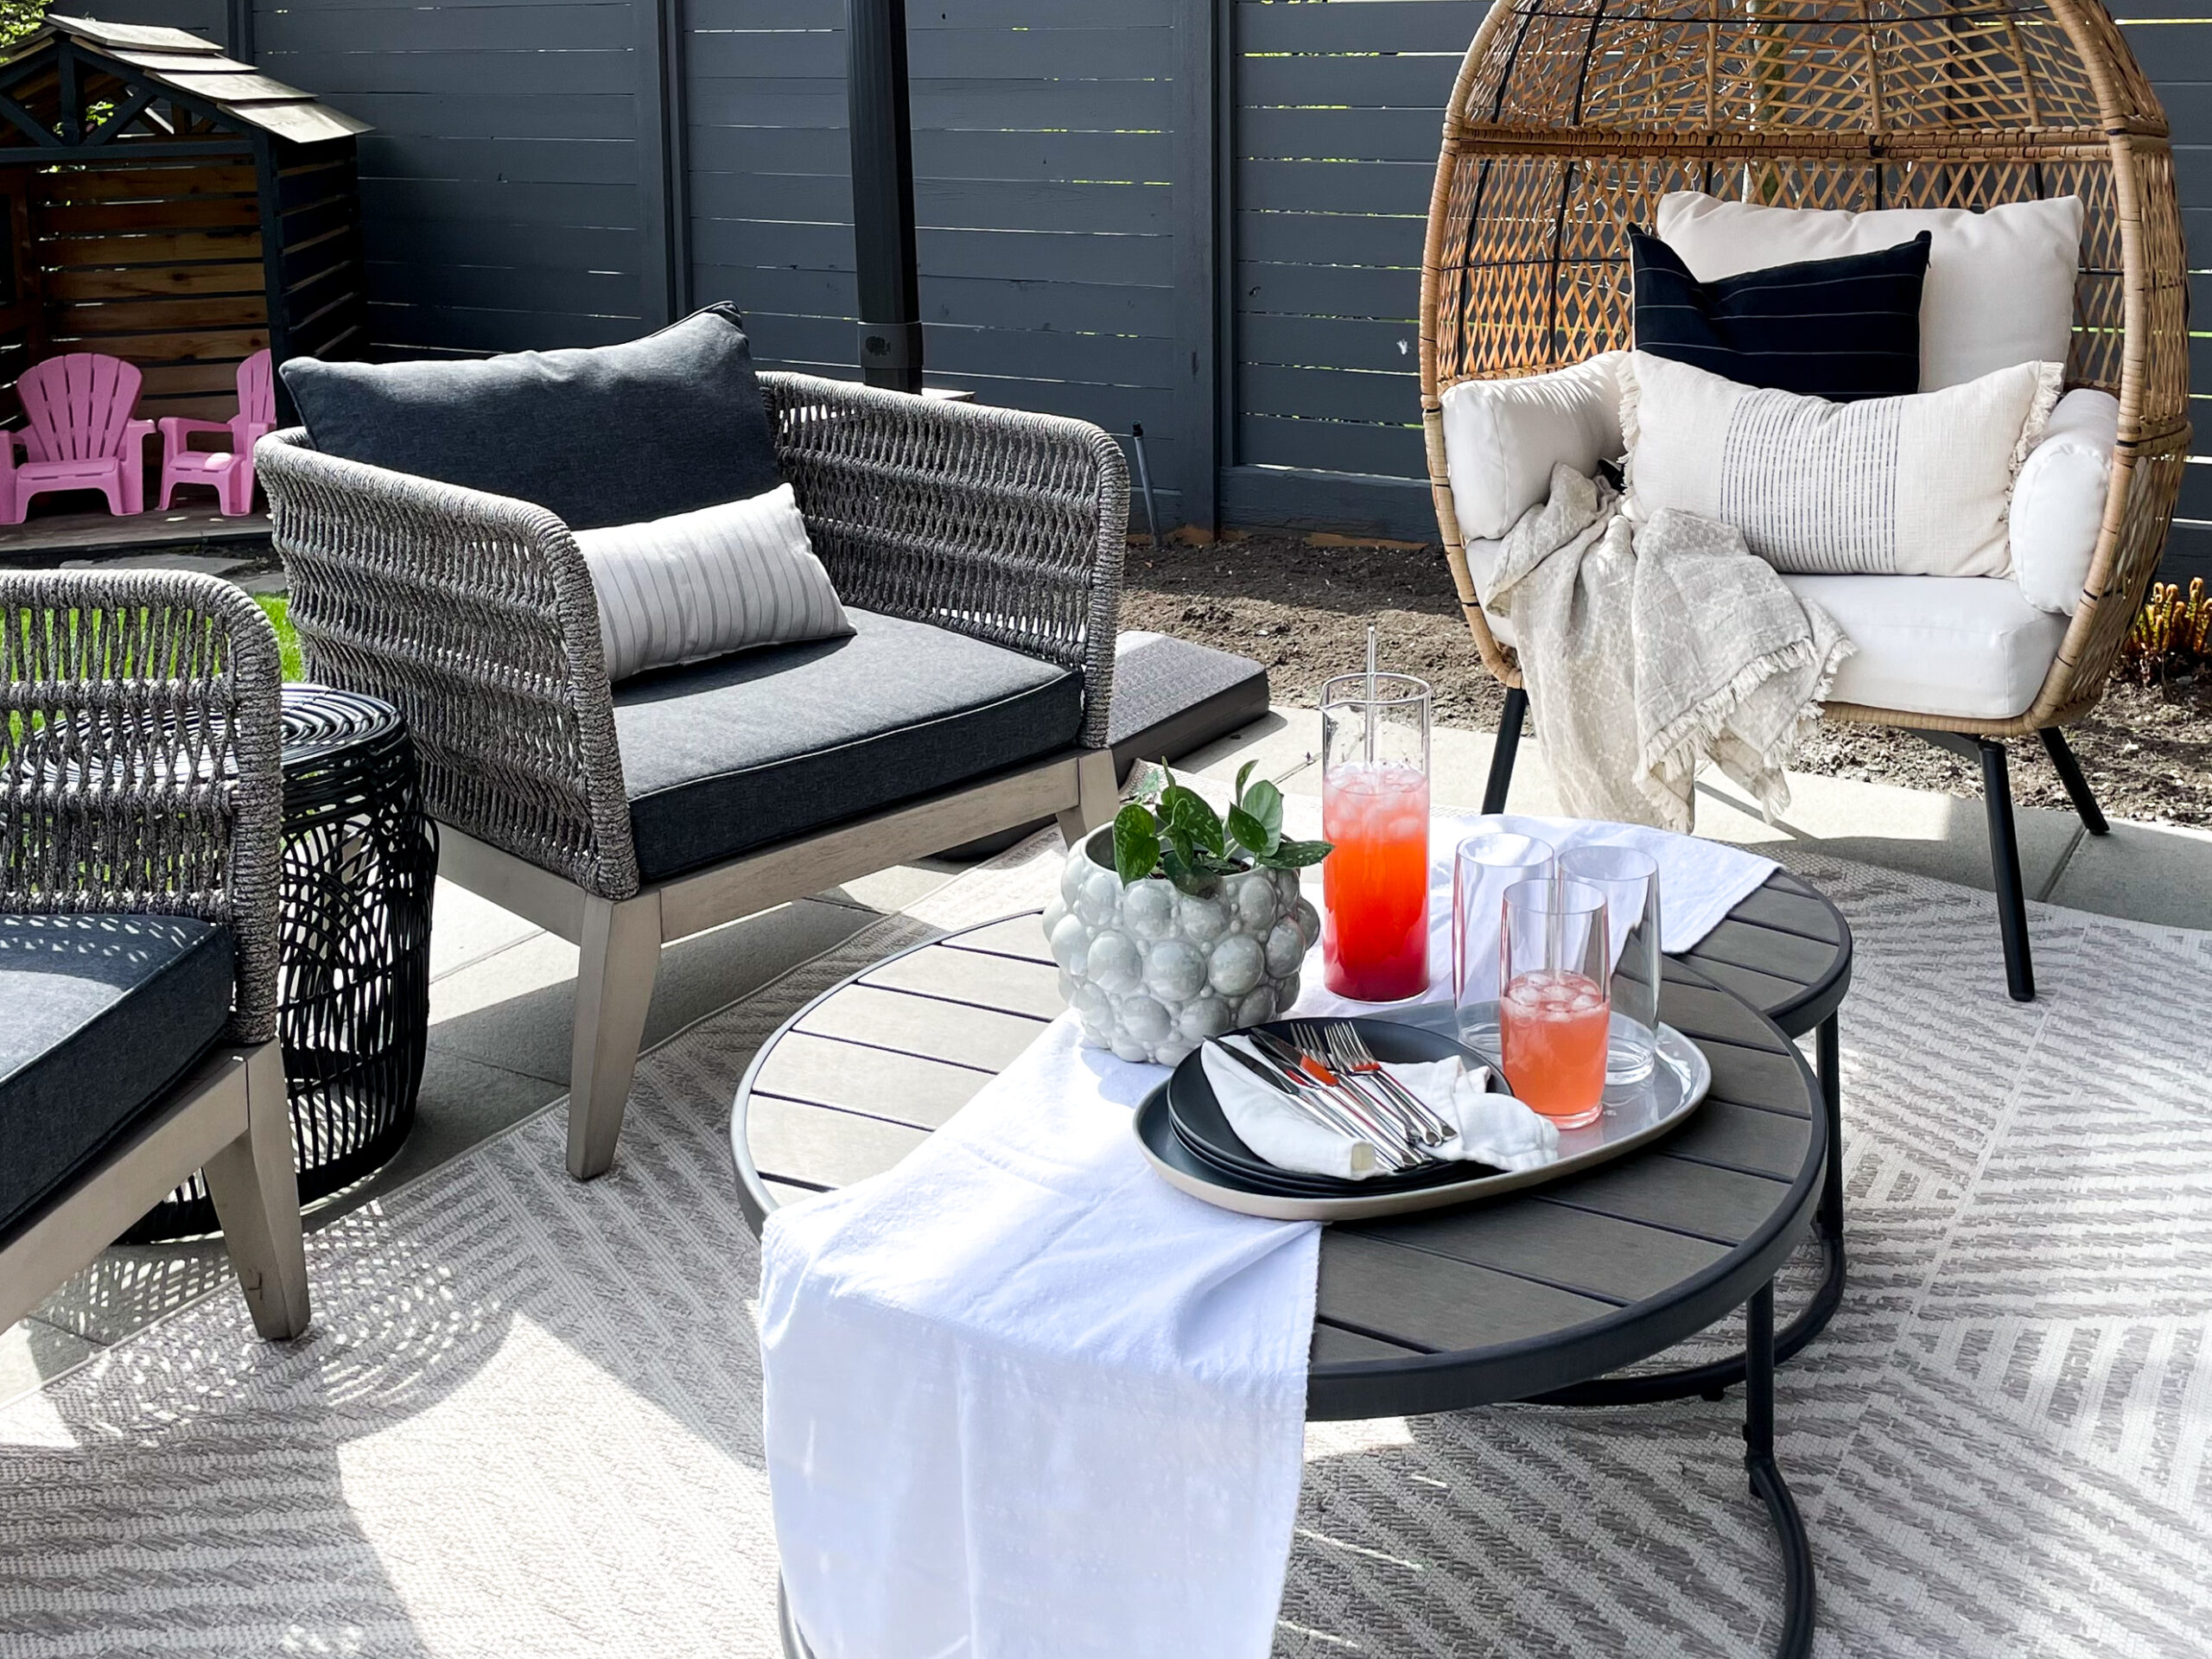 Summer Must-Have's include cozy pillows like pictured on a patio chair as well as a blanket for when the sun goes down.